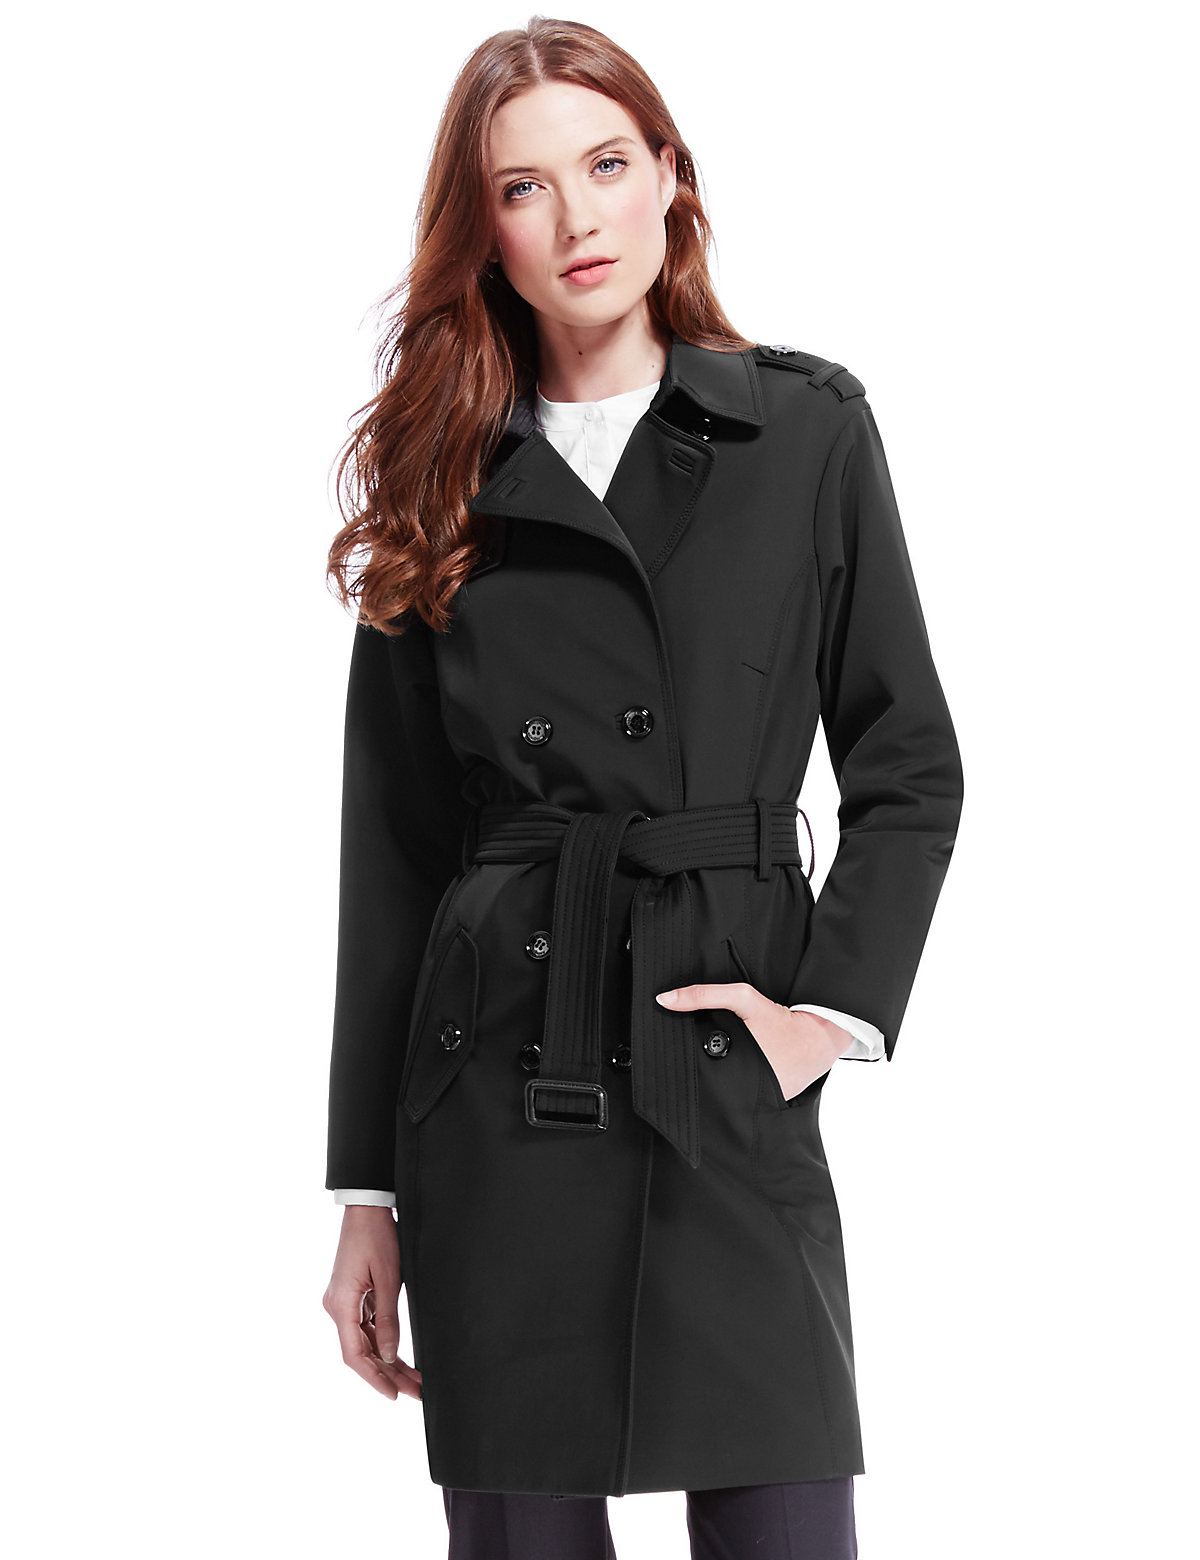 Autograph Buttonsafe Belted Trench Coat | Topicbean